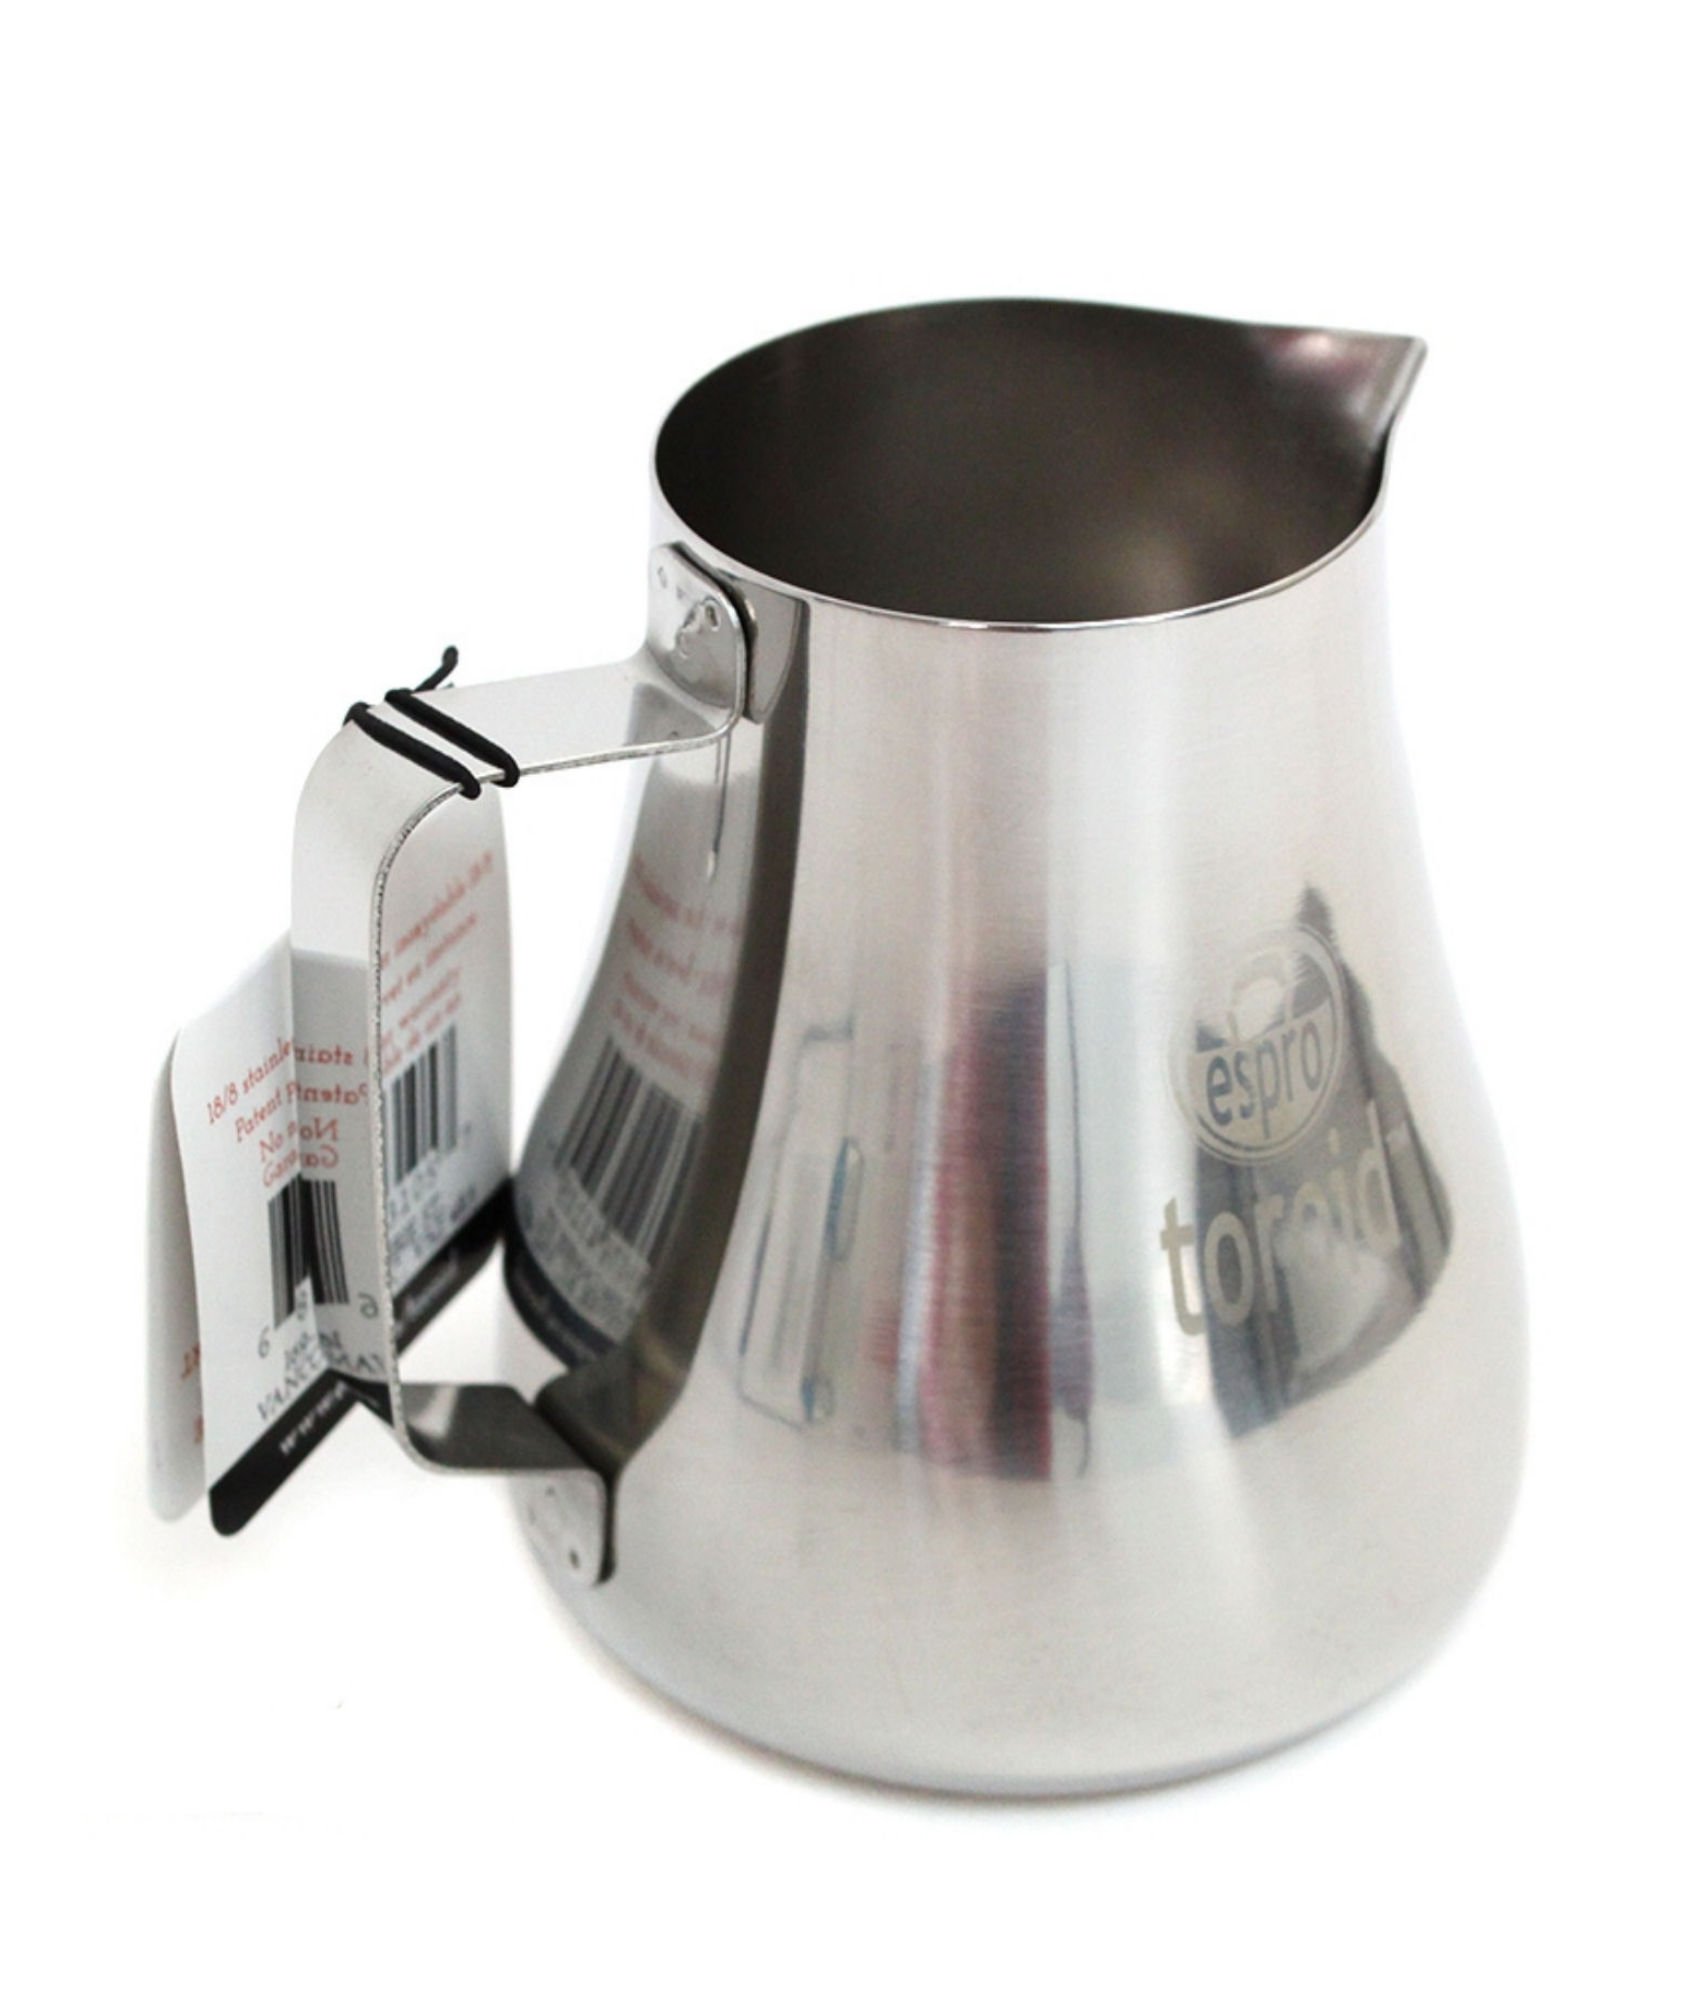 Espro Toroid Stainless Steel Milk Frothing Pitcher